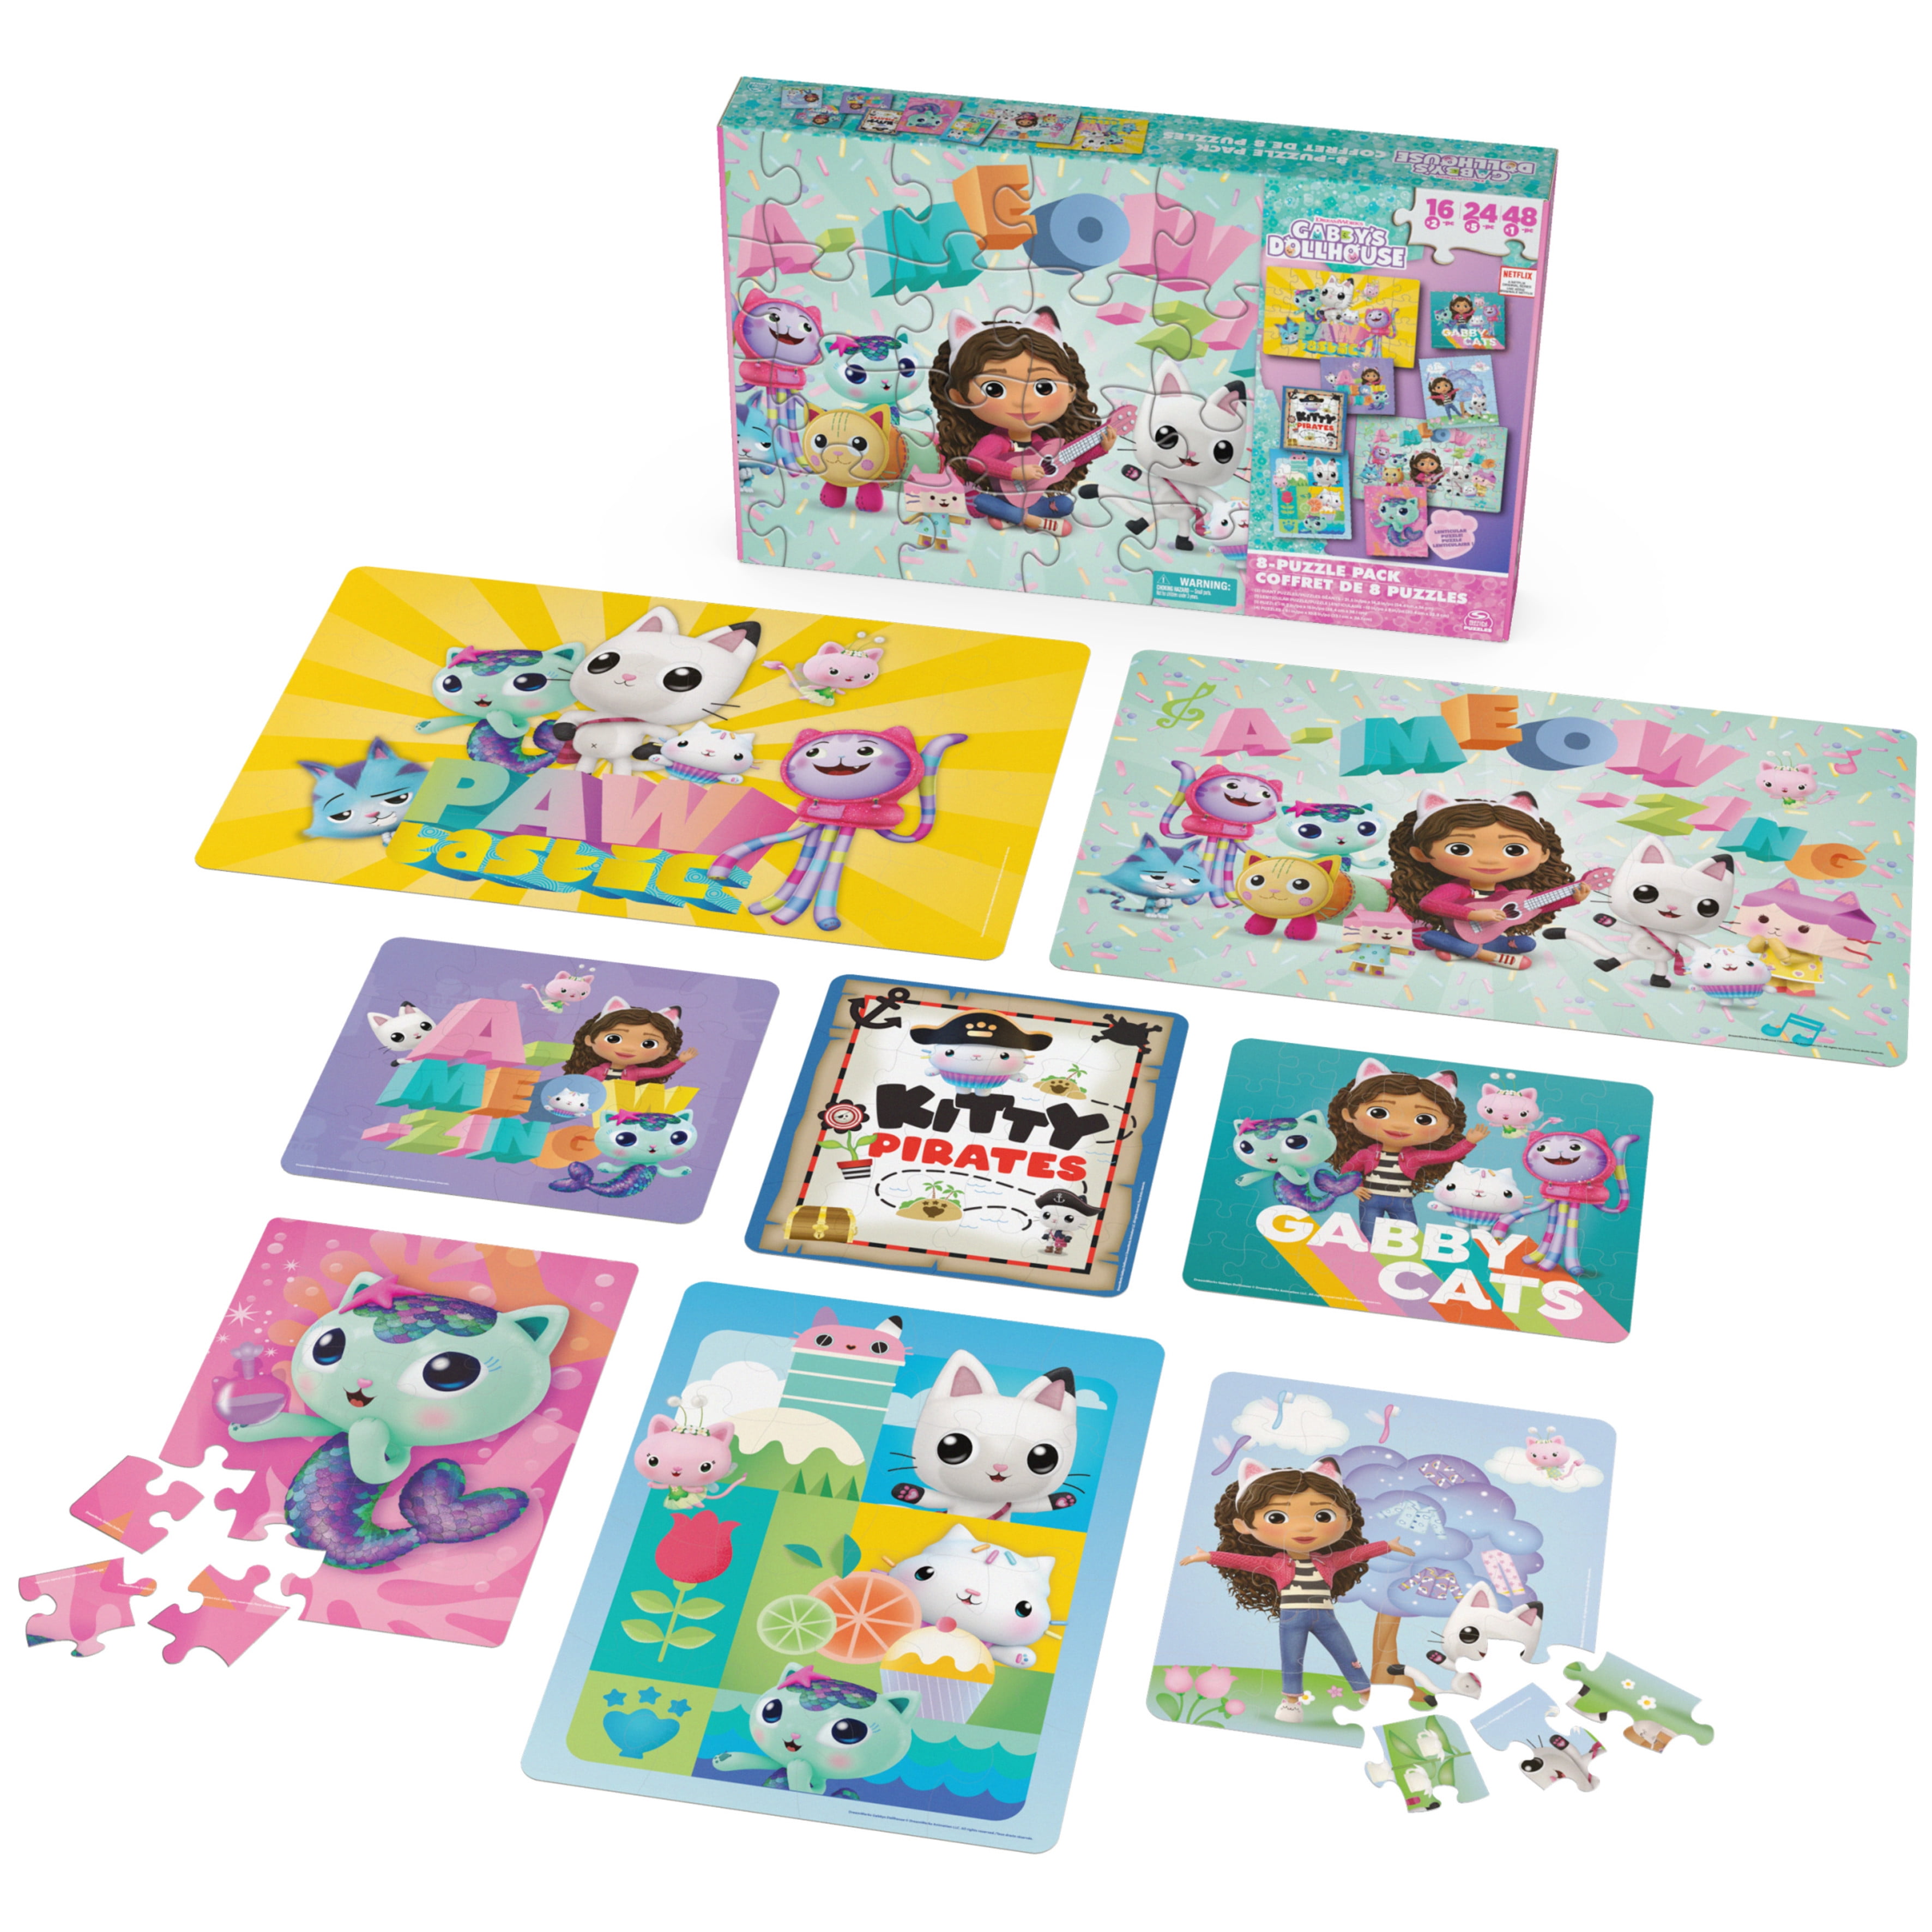 Gabby's Dollhouse, 8-Puzzle Pack 16-Piece 24-Piece 48-Piece Jigsaw Puzzles  Walmart Exclusive, for Preschoolers Ages 4 and up 